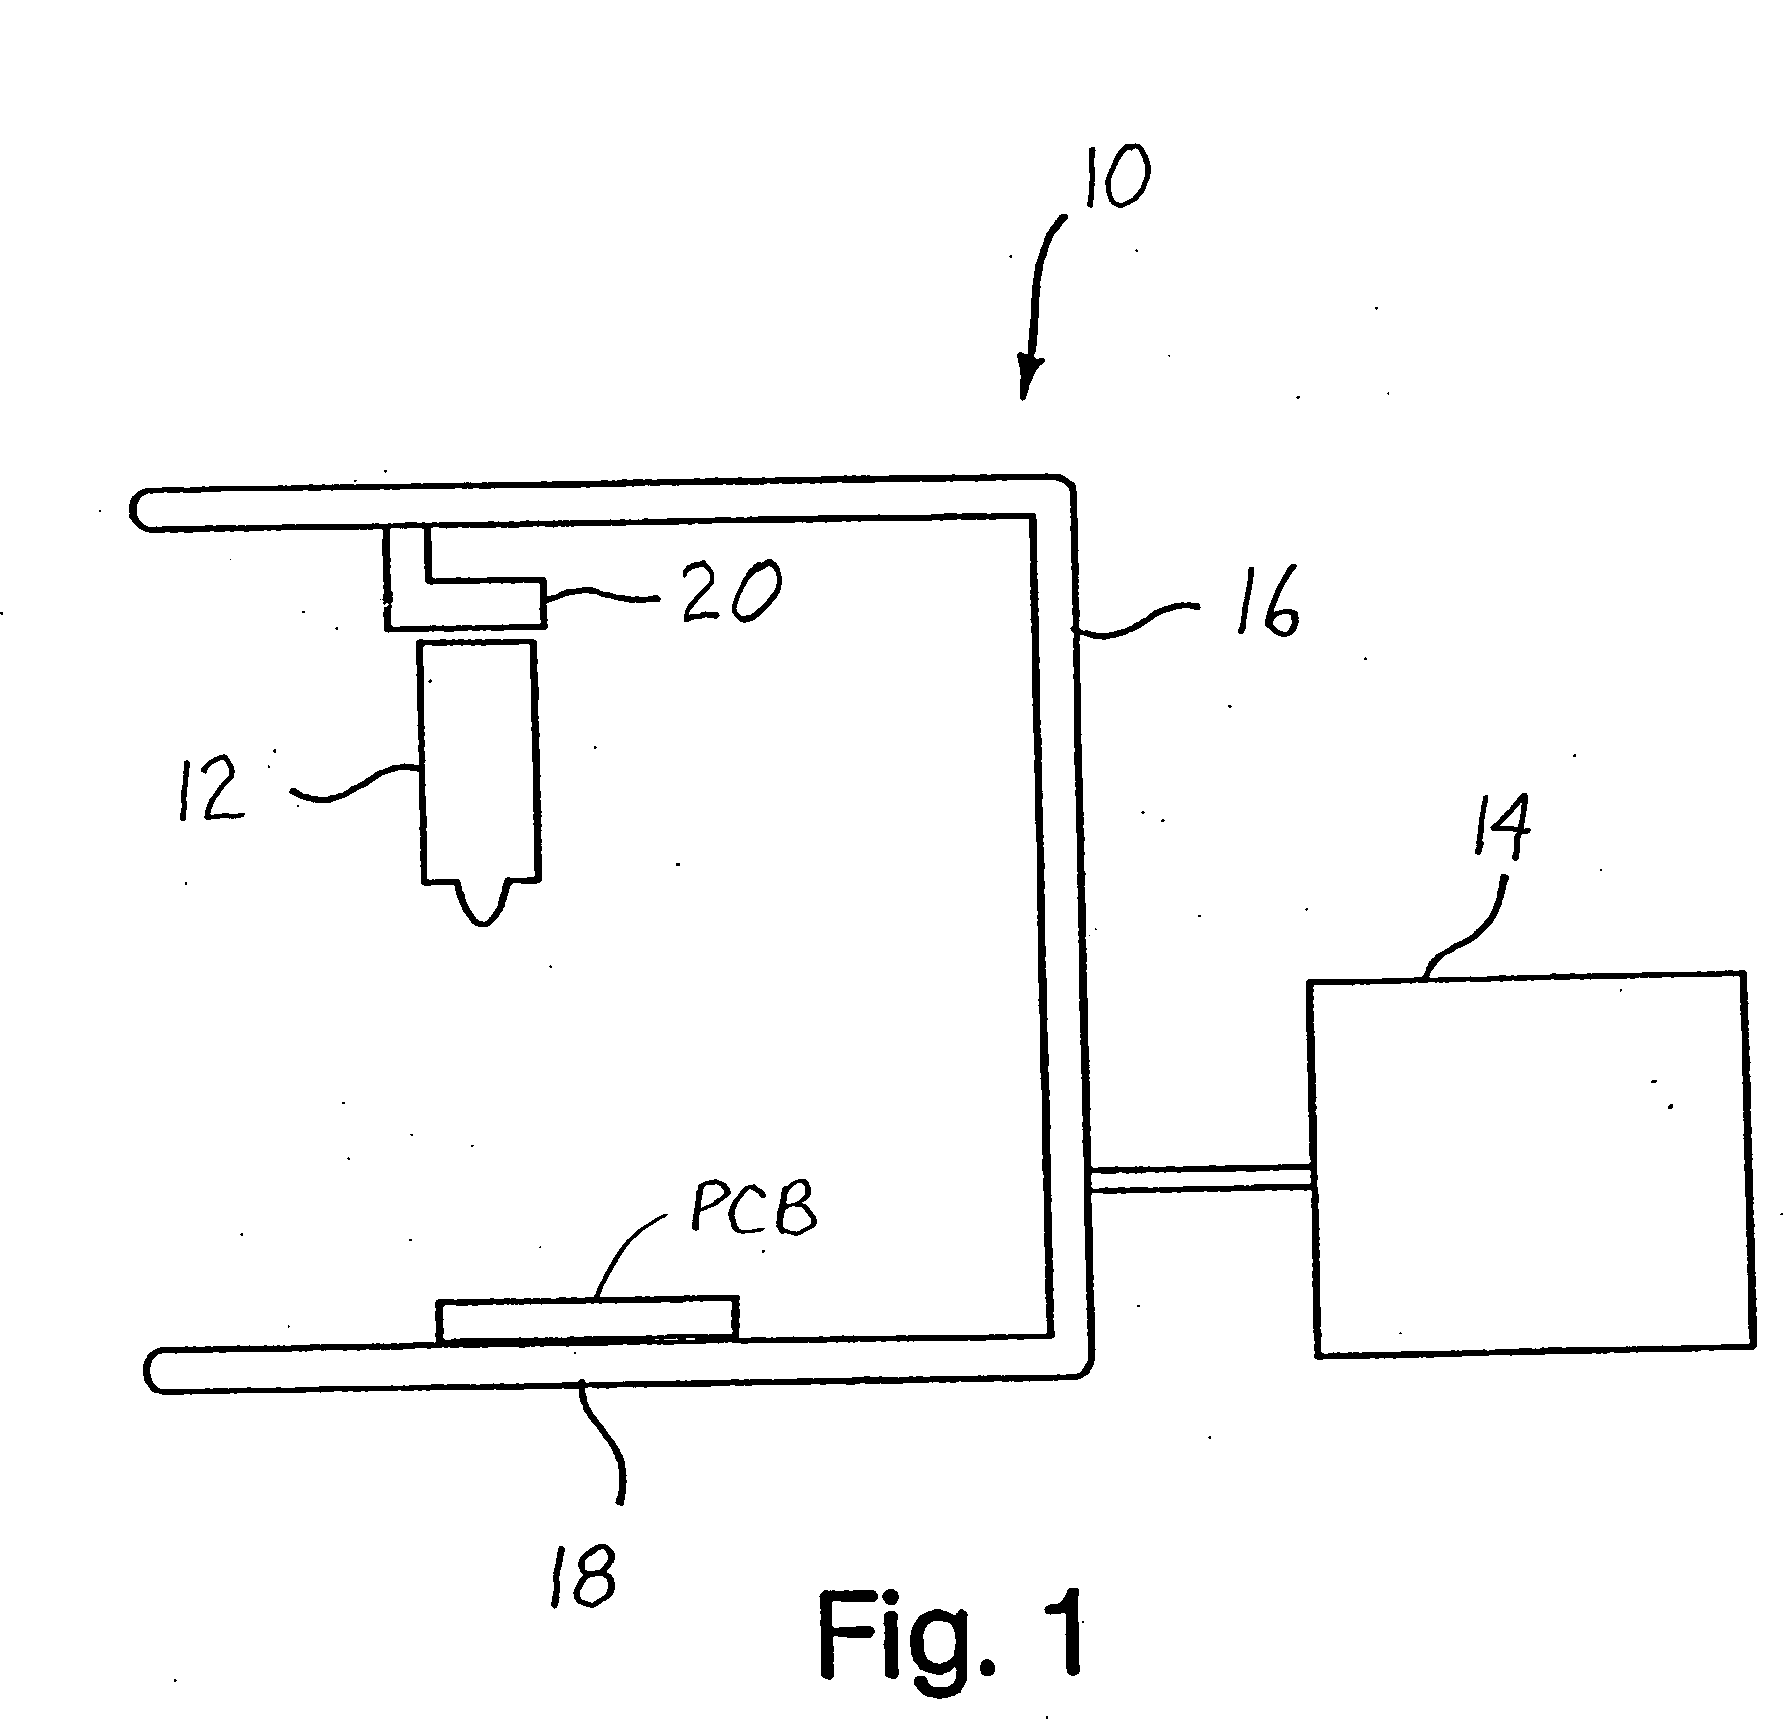 Method and apparatus for streaming a viscous material on a substrate